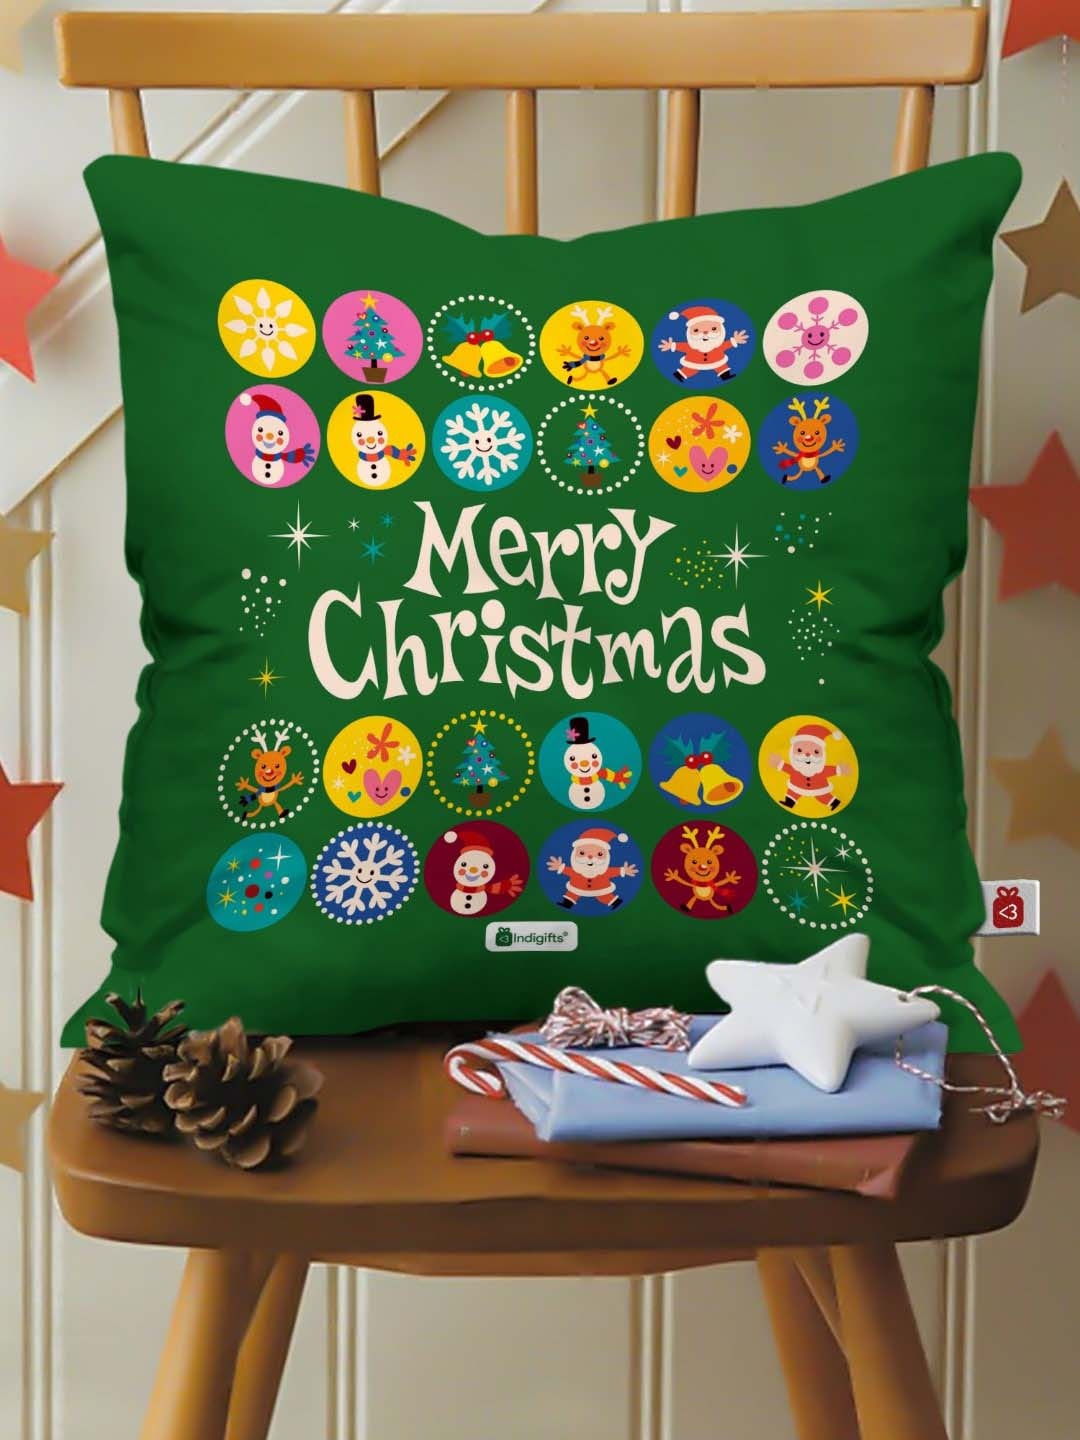 

Indigifts Green Printed Merry Christmas Cushion Cover with Filler